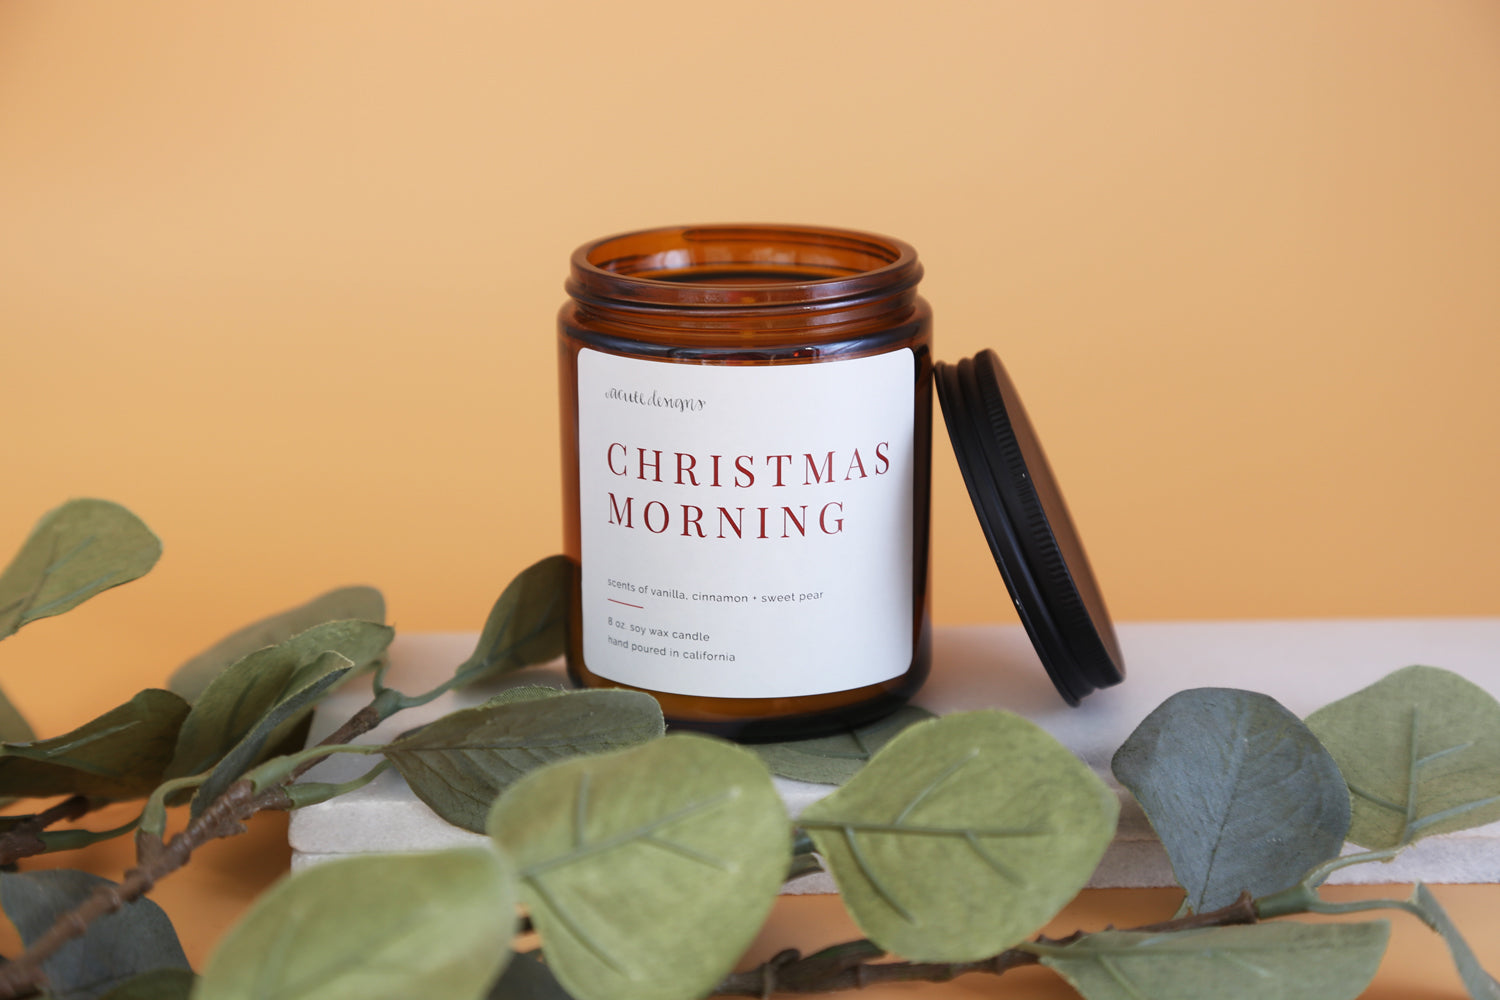 Christmas Morning Candle -  Scented Holiday Candle, Scents of vanilla, cinnamon, and sweet pear